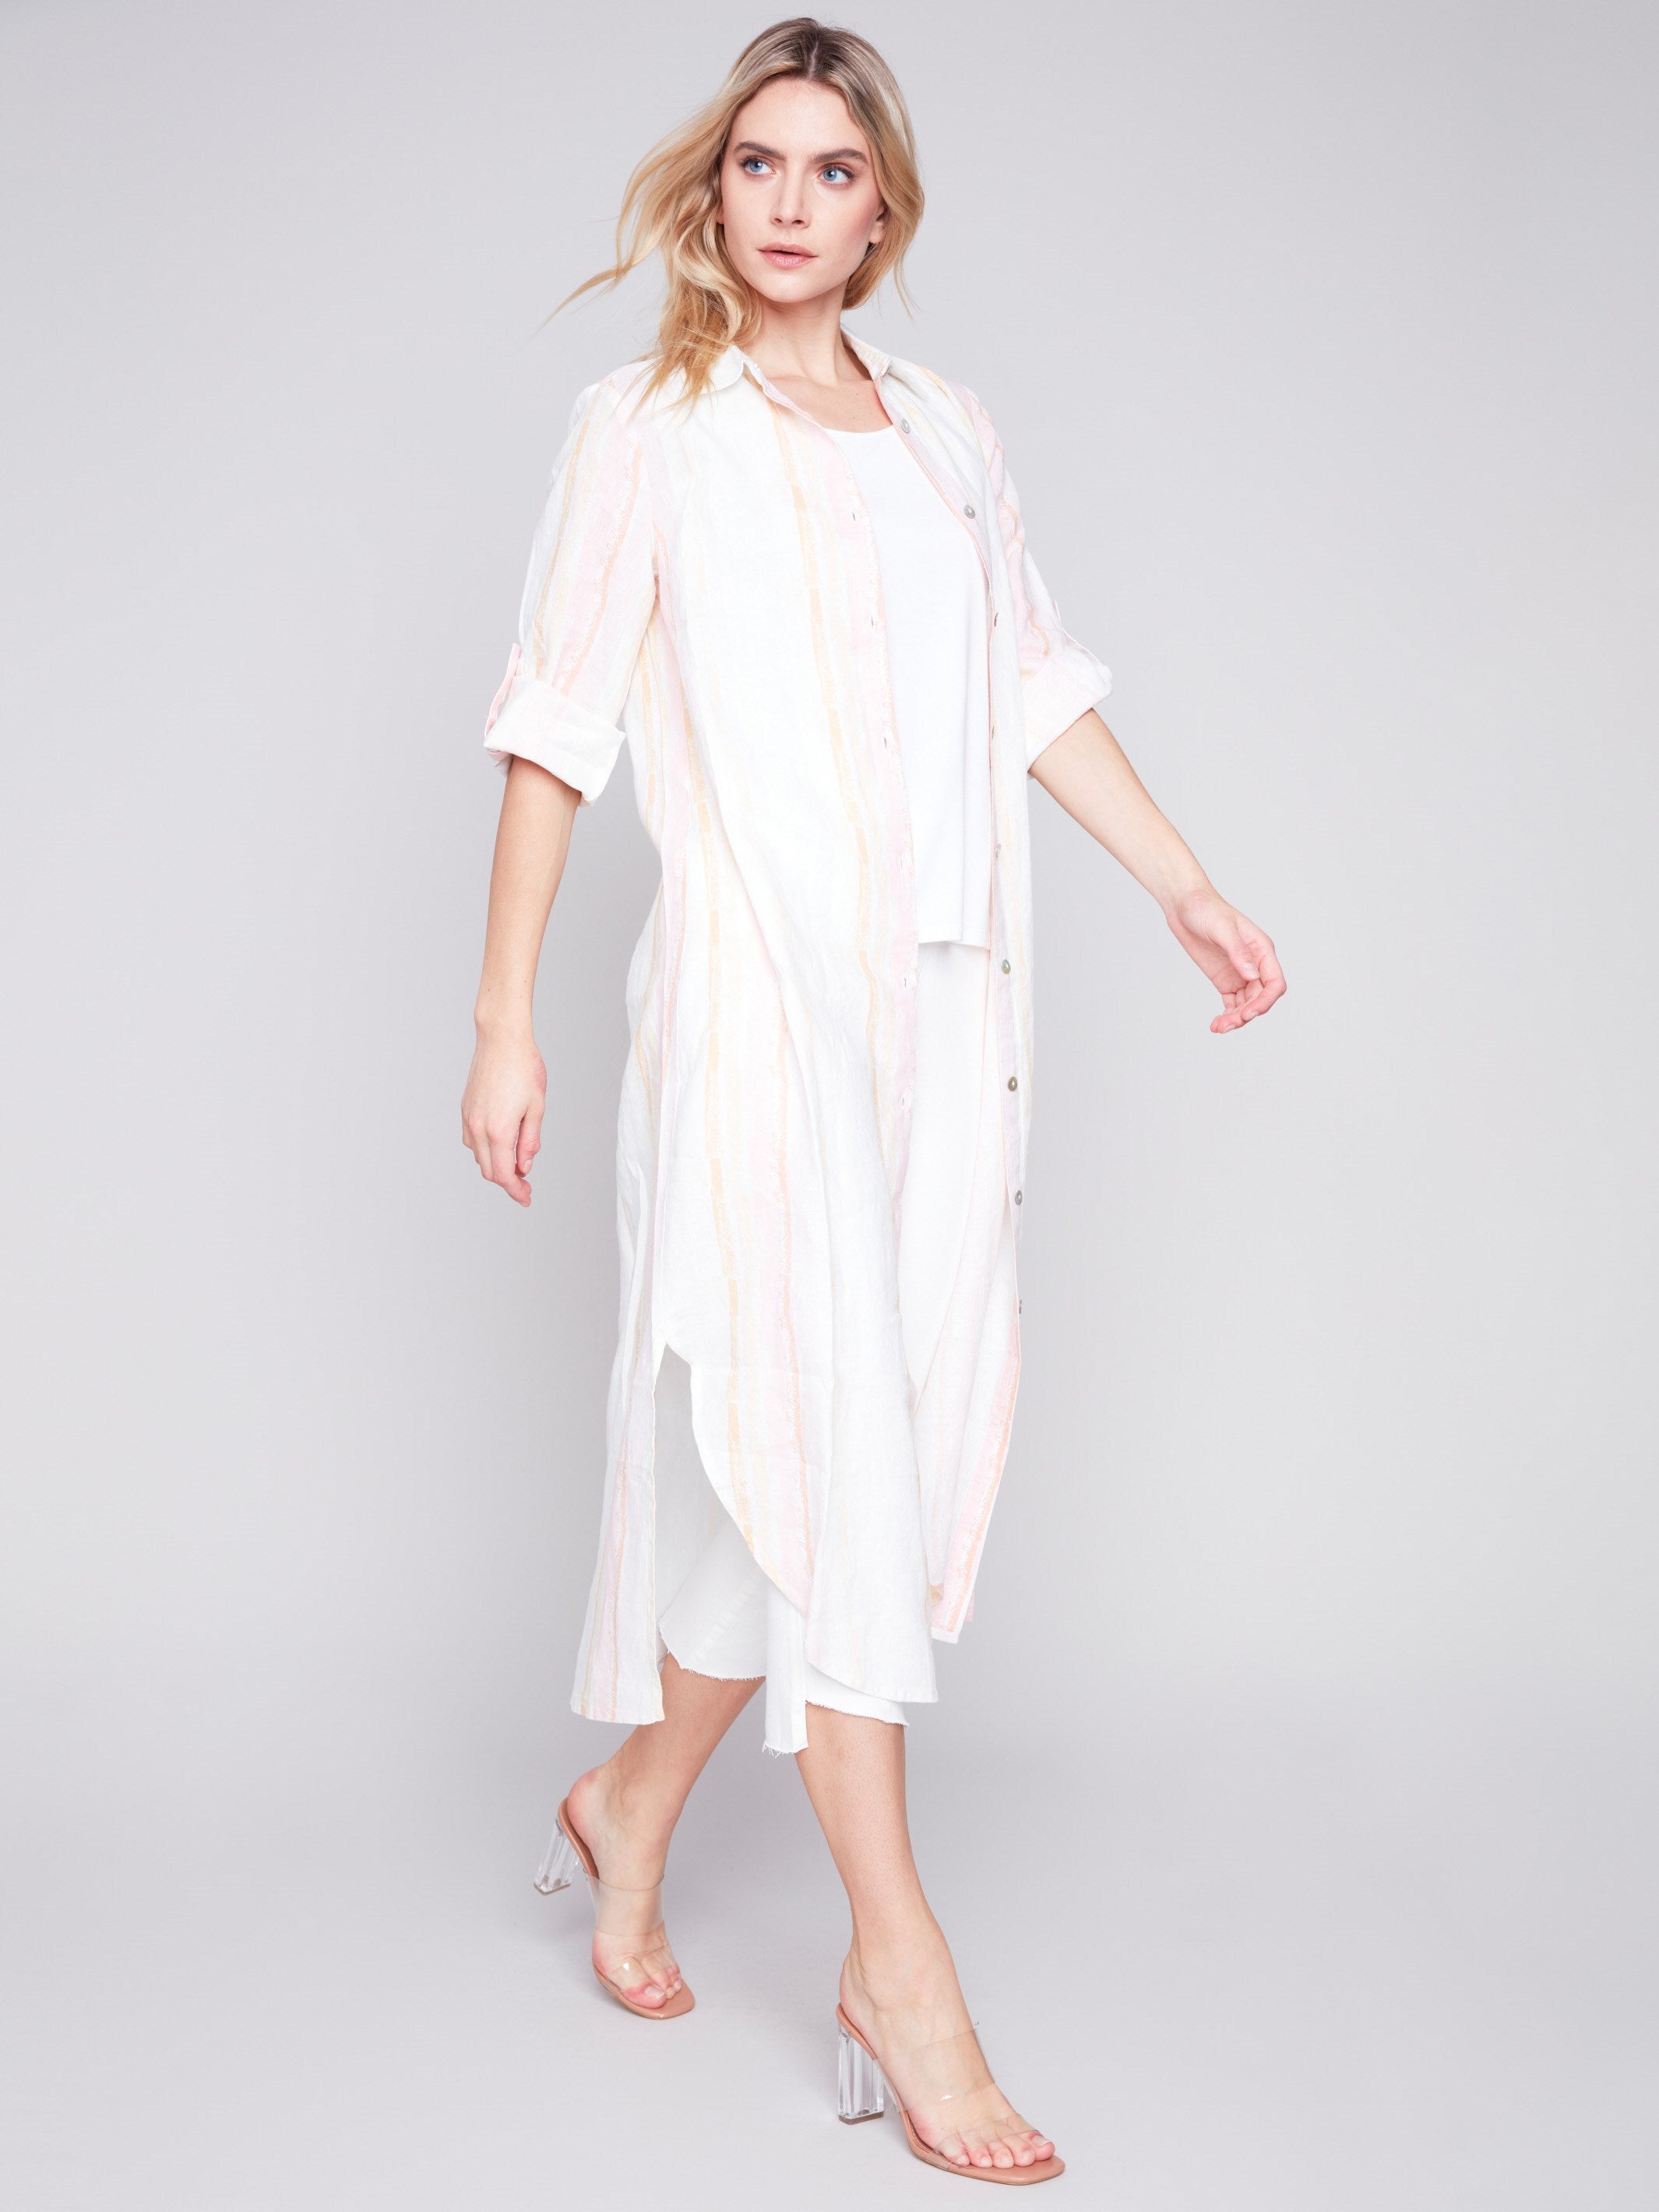 Striped Long Linen Tunic Dress - Tulip - Charlie B Collection Canada - Image 2